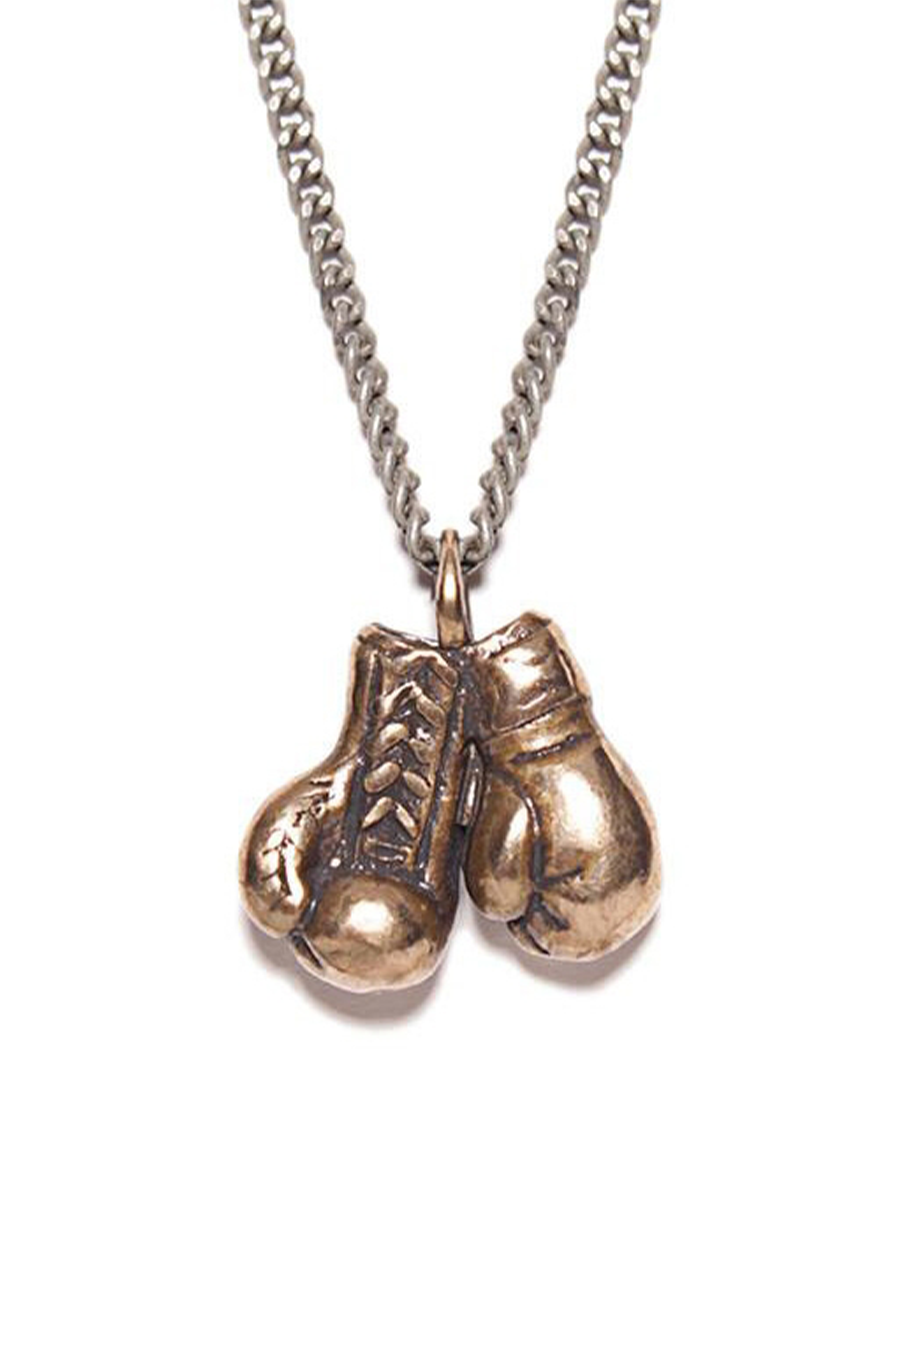 Boxing Gloves Necklace - Main Image Number 1 of 2